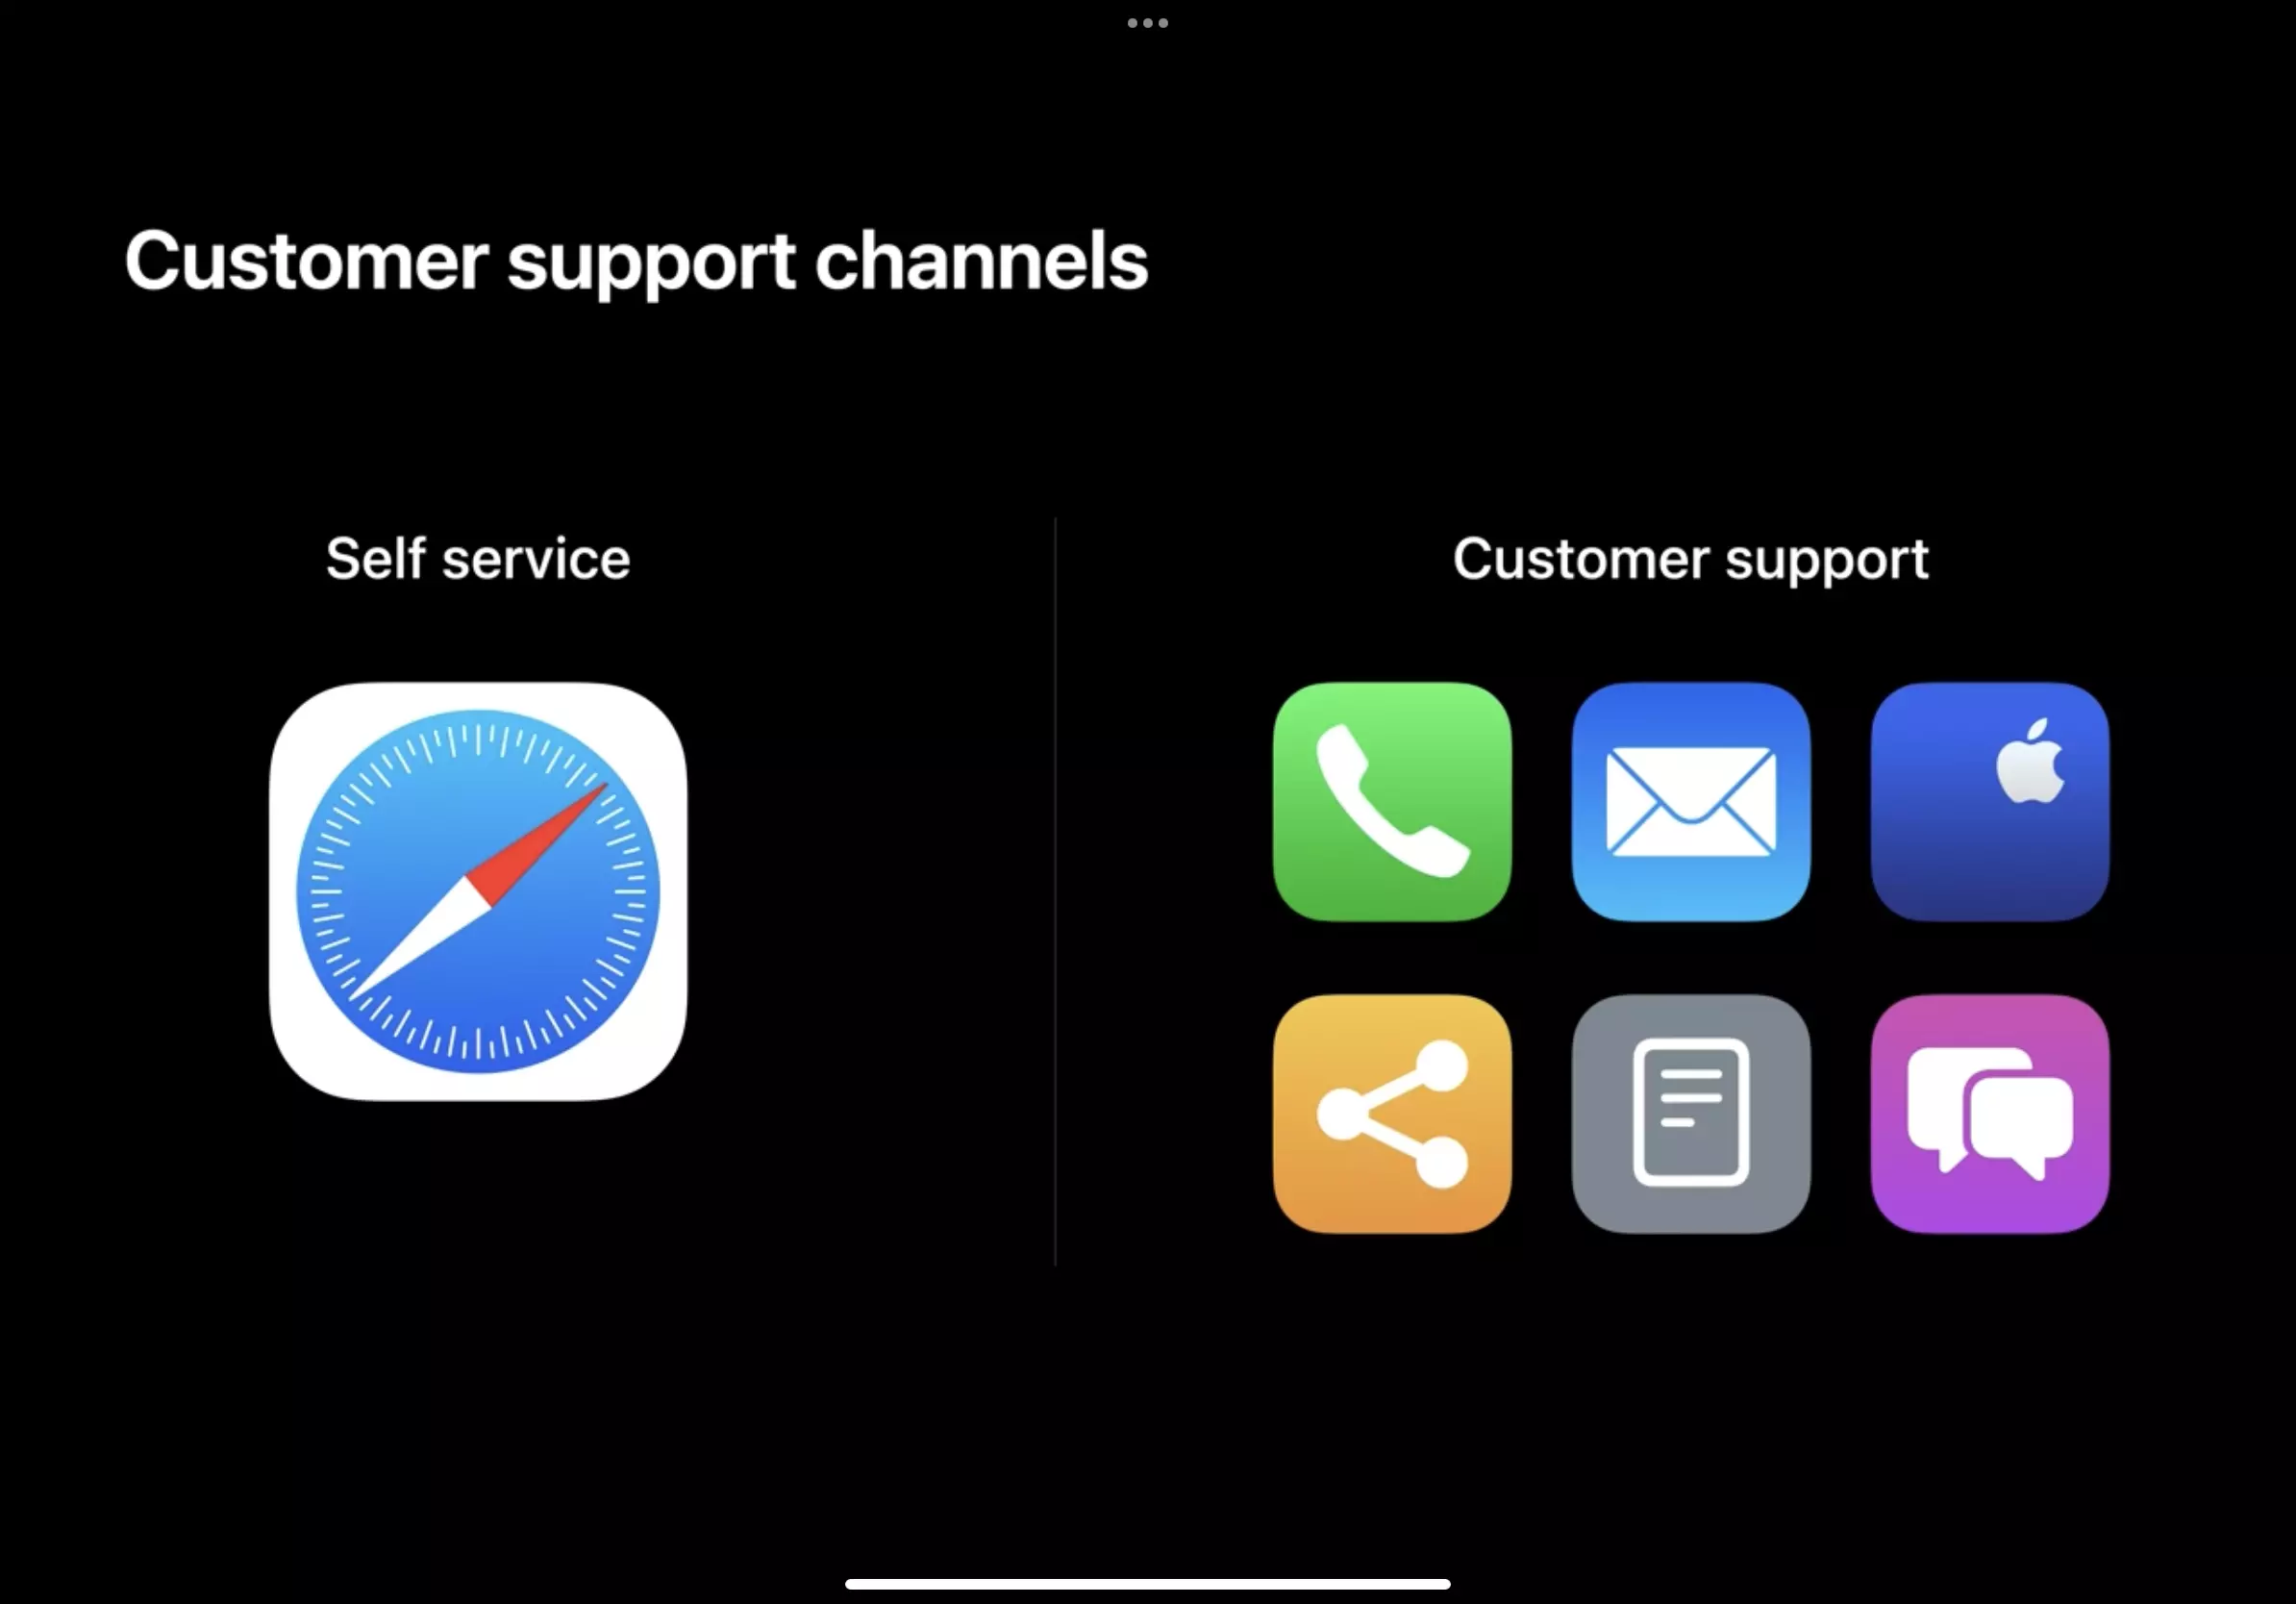 Customers can request a refund via Apples website, by calling or emailing apple or using the support app. They can also contact your business directly or do it within the app.